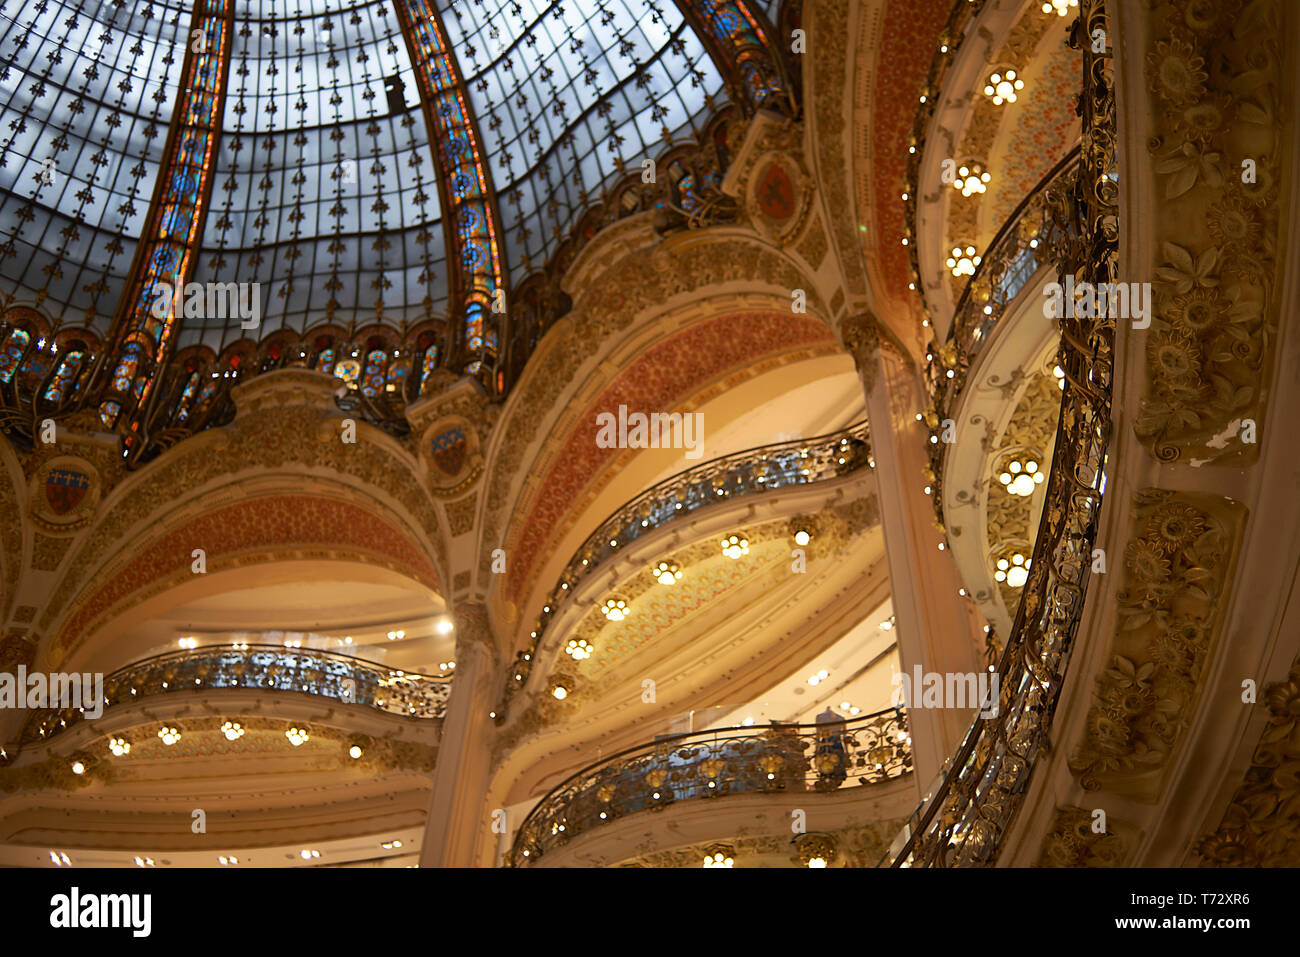 Beautiful Interior Architecture Of The Galeries Lafayette In The